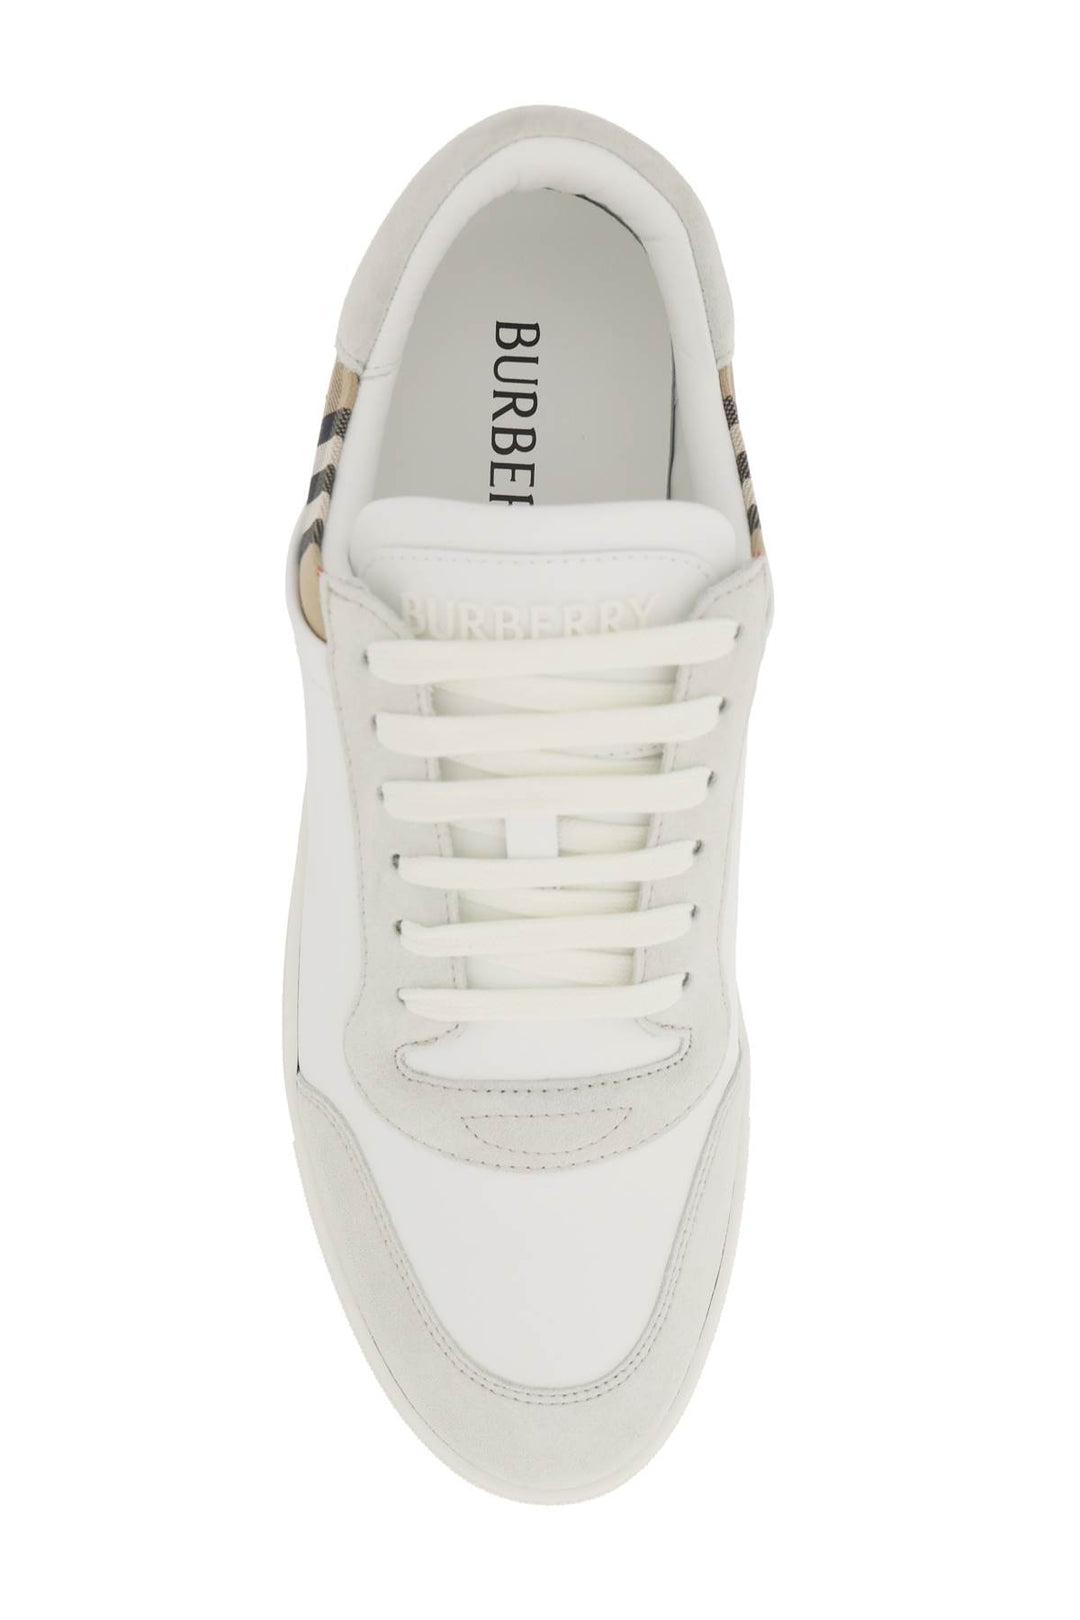 Burberry Check Leather Sneakers   Bianco